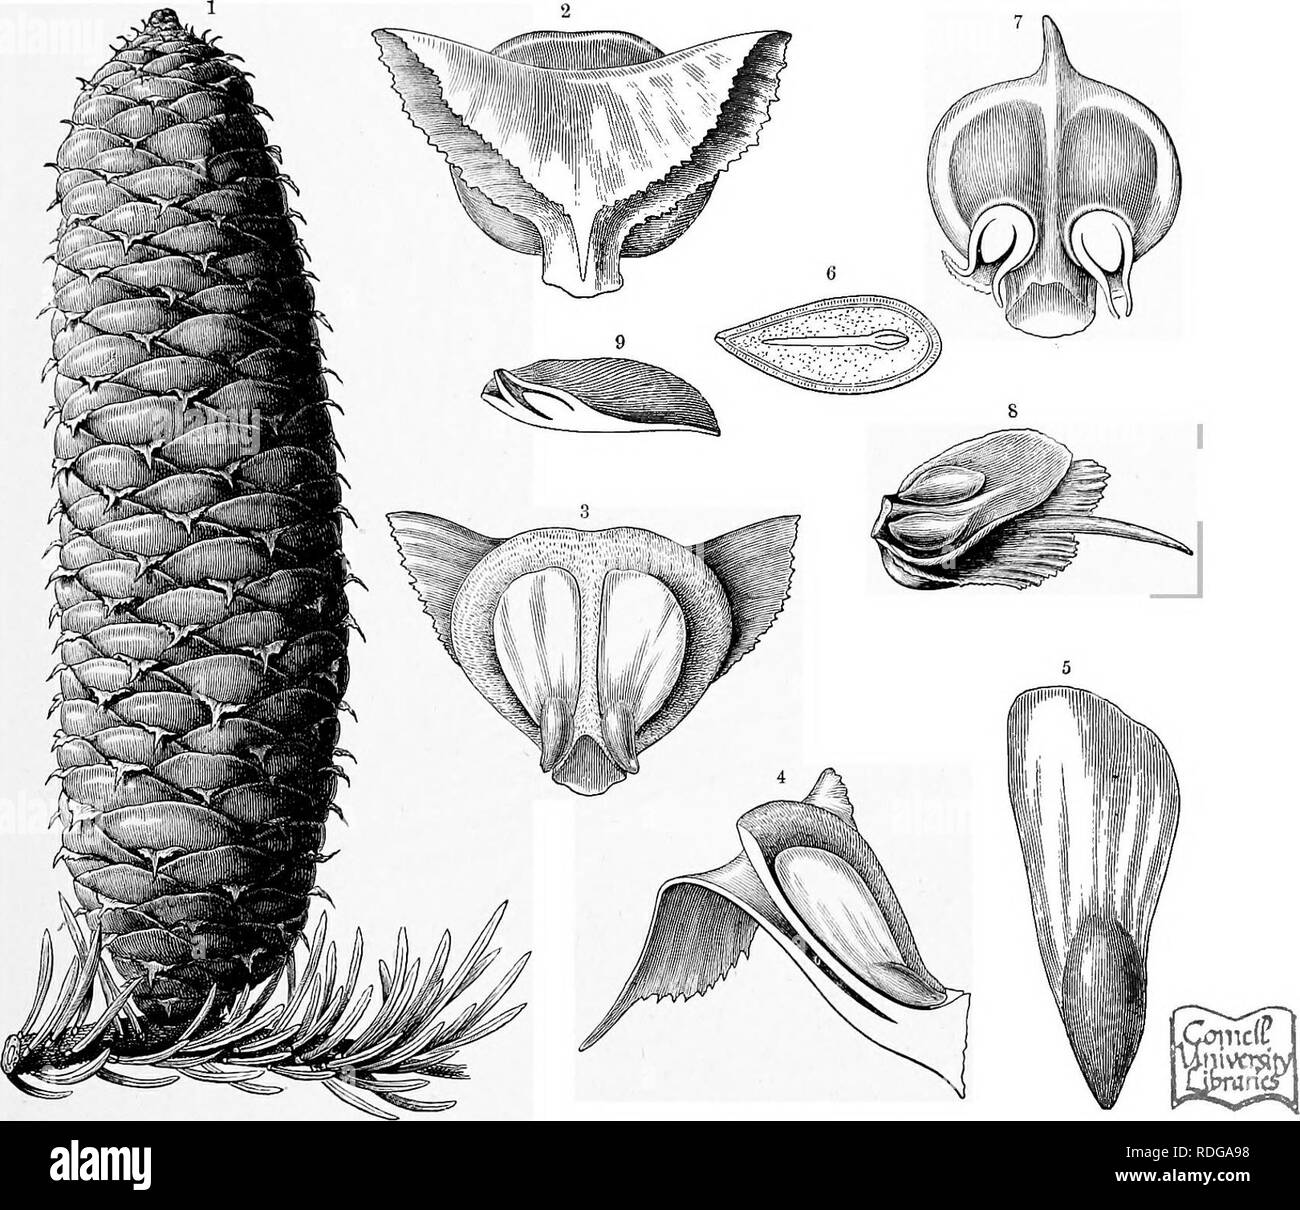 . The natural history of plants, their forms, growth, reproduction, and distribution;. Botany. GYMNOSPERMiE. 721 cones. The only other genus is Agathis (Dammara). These two genera include 14 species, distributed in the Southern Hemisphere only. Abietinece.—This family includes the majority of familiar Conifers of the Northern Hemisphere. They are distinguished by the fact that the scales of the female cones are divided into an upper ovule-bearing scale (the ovuliferous scale) and a lower subtending bract scale. The ovules are borne in pairs on the former,. Fig. 407.—Female Coue and Scales in A Stock Photo